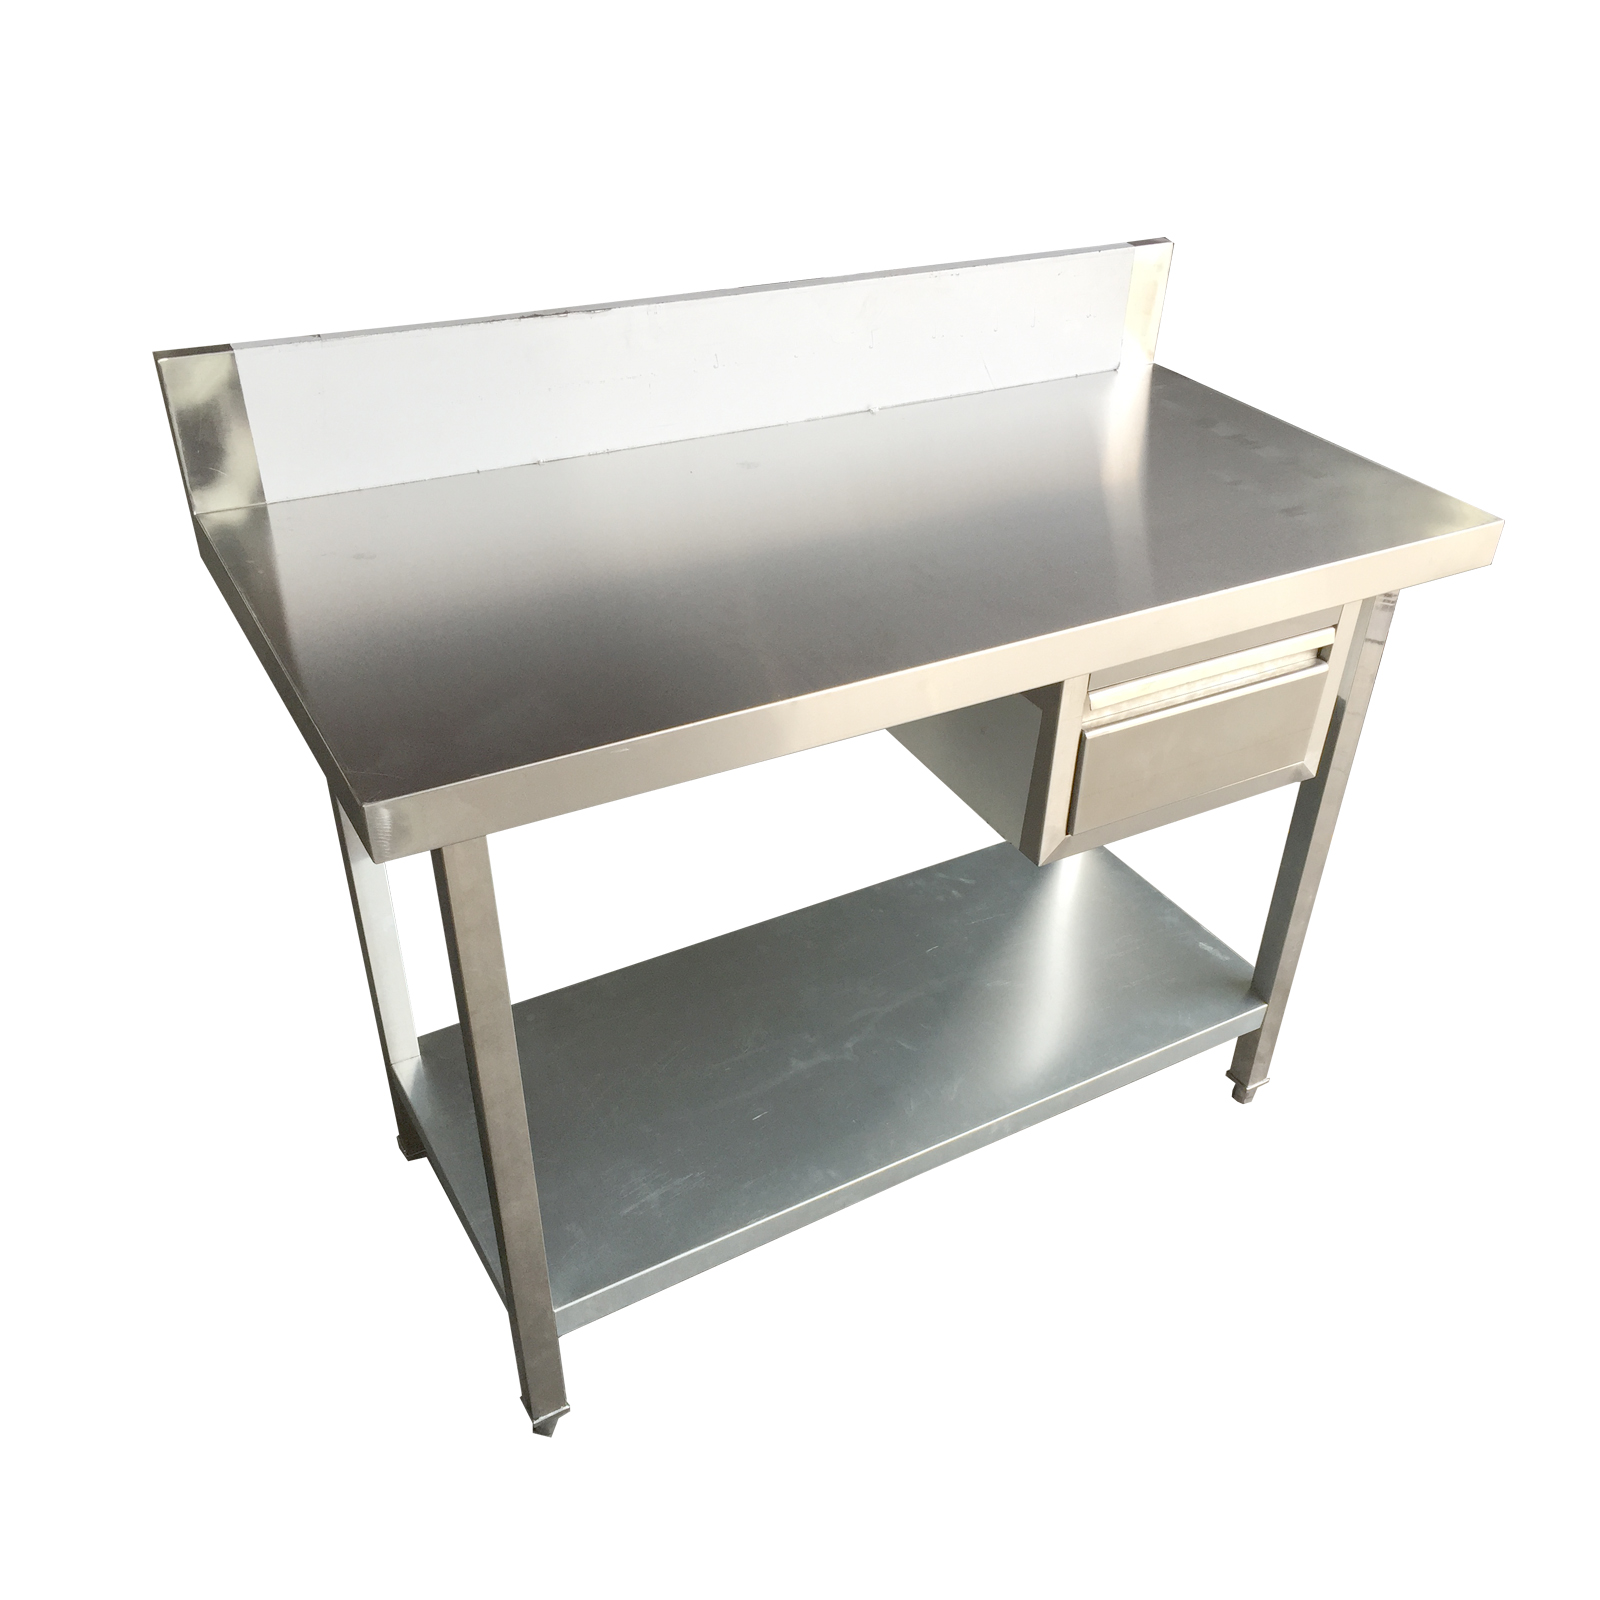 Stainless Steel WorkTable with Drawer